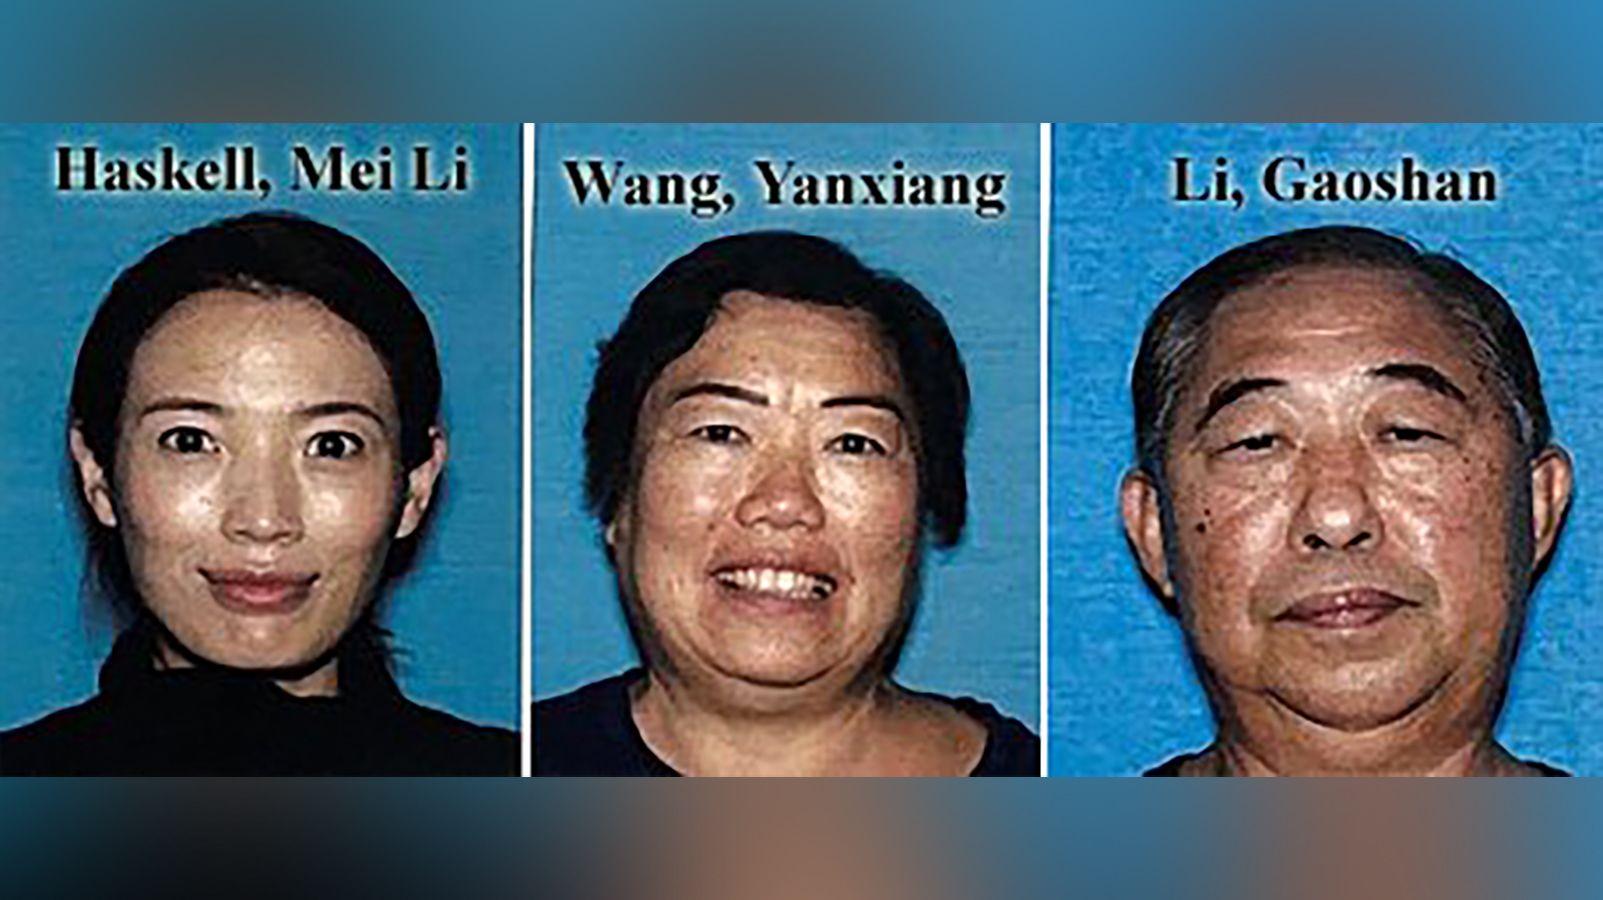 Los Angeles Man Pleads Not Guilty to Killing Wife and Her Parents, Putting Body Parts in Trash